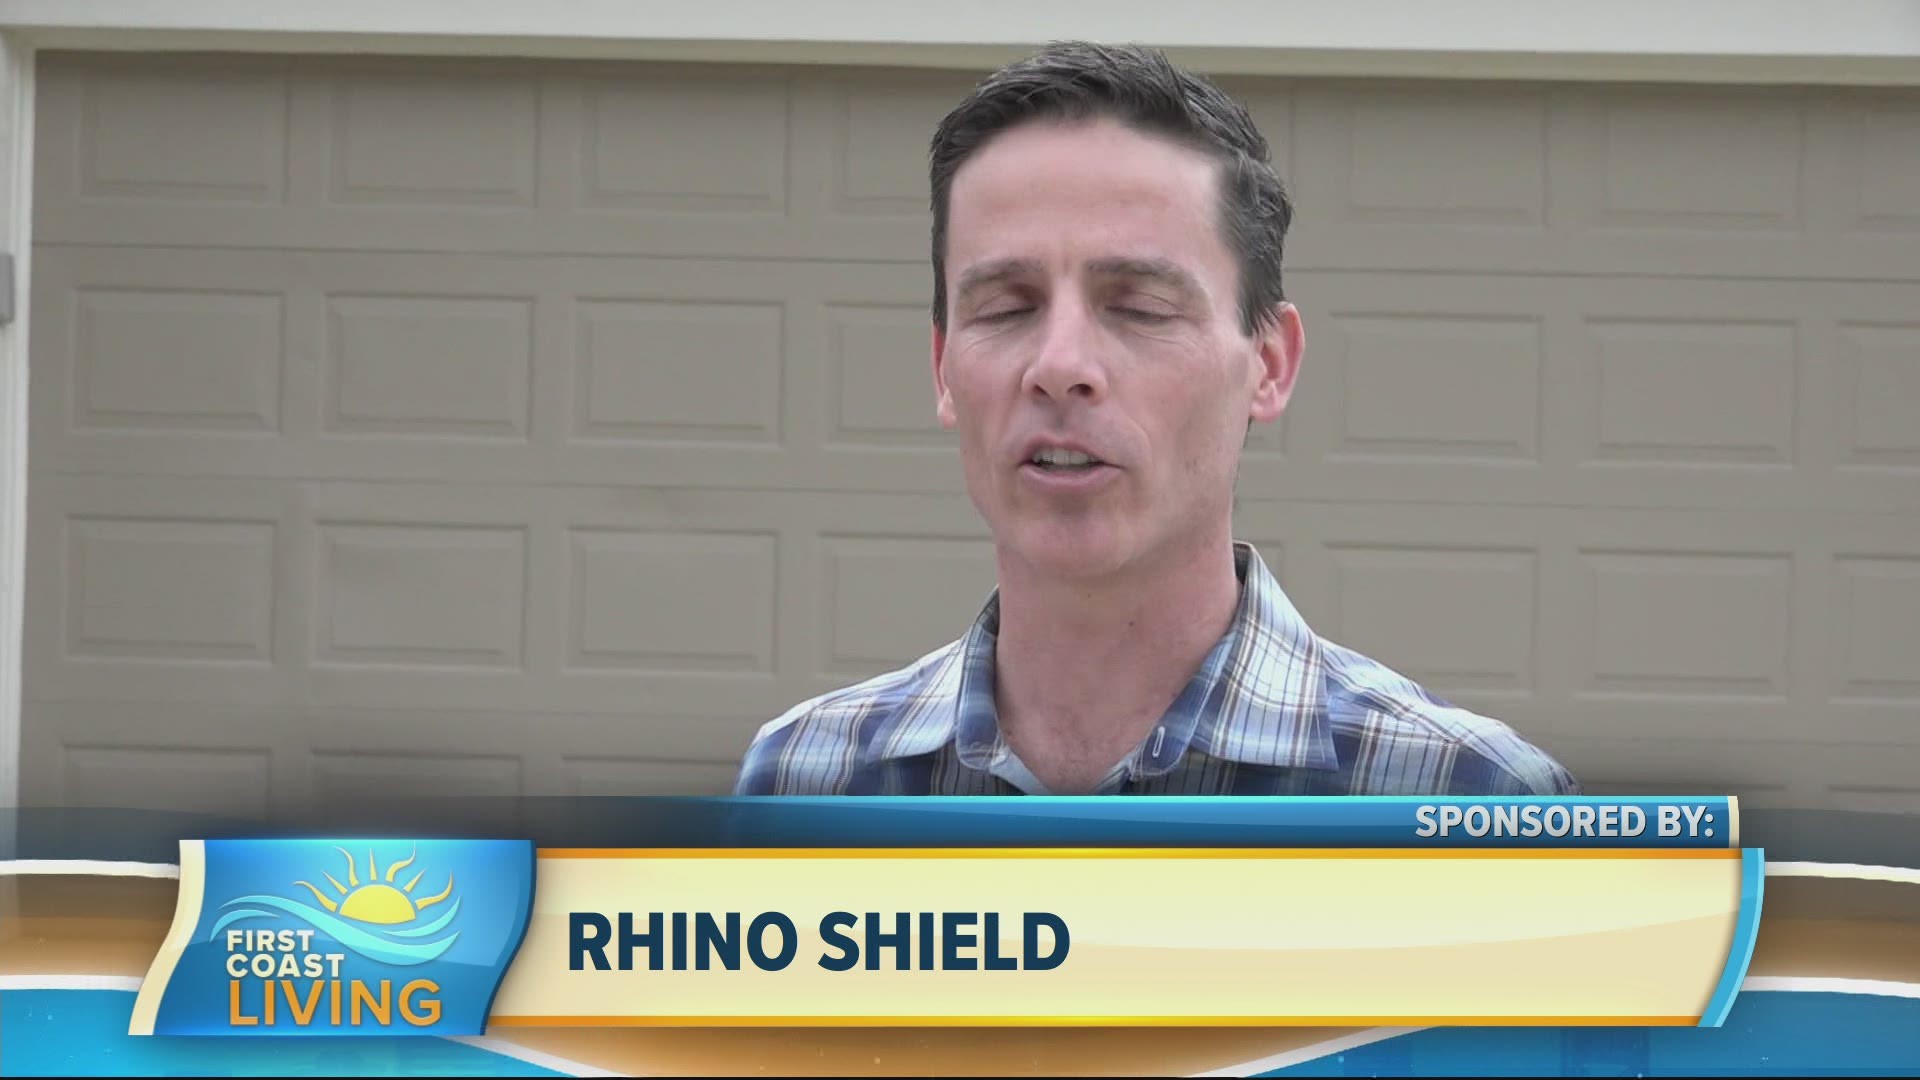 Rhino Shield talks to some of its customers about its services